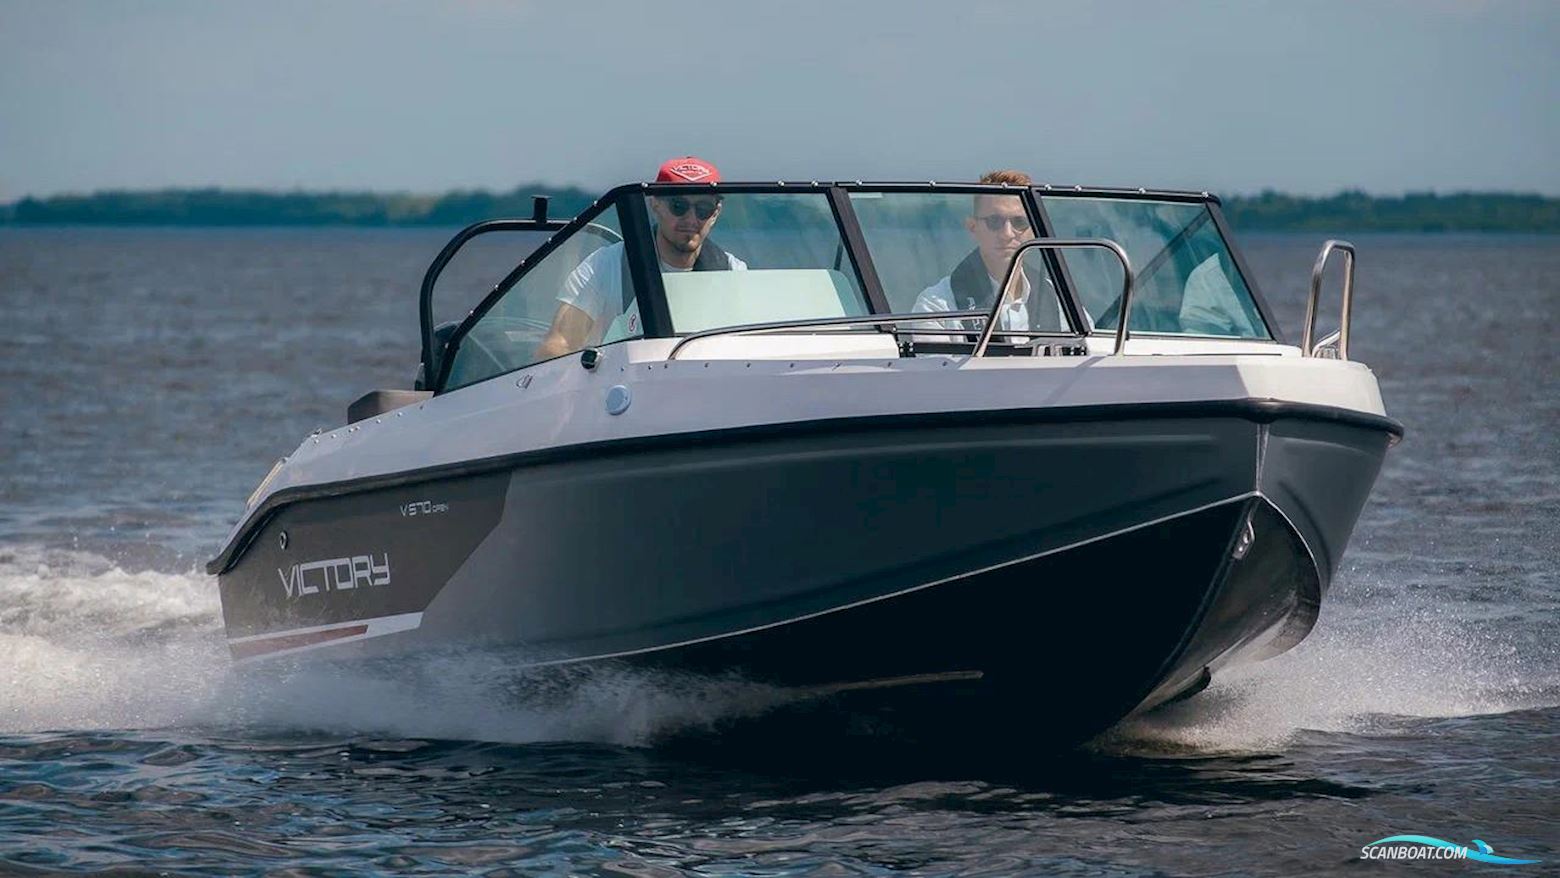 Victory 570 Open Motor boat 2021, with Mercury engine, Sweden